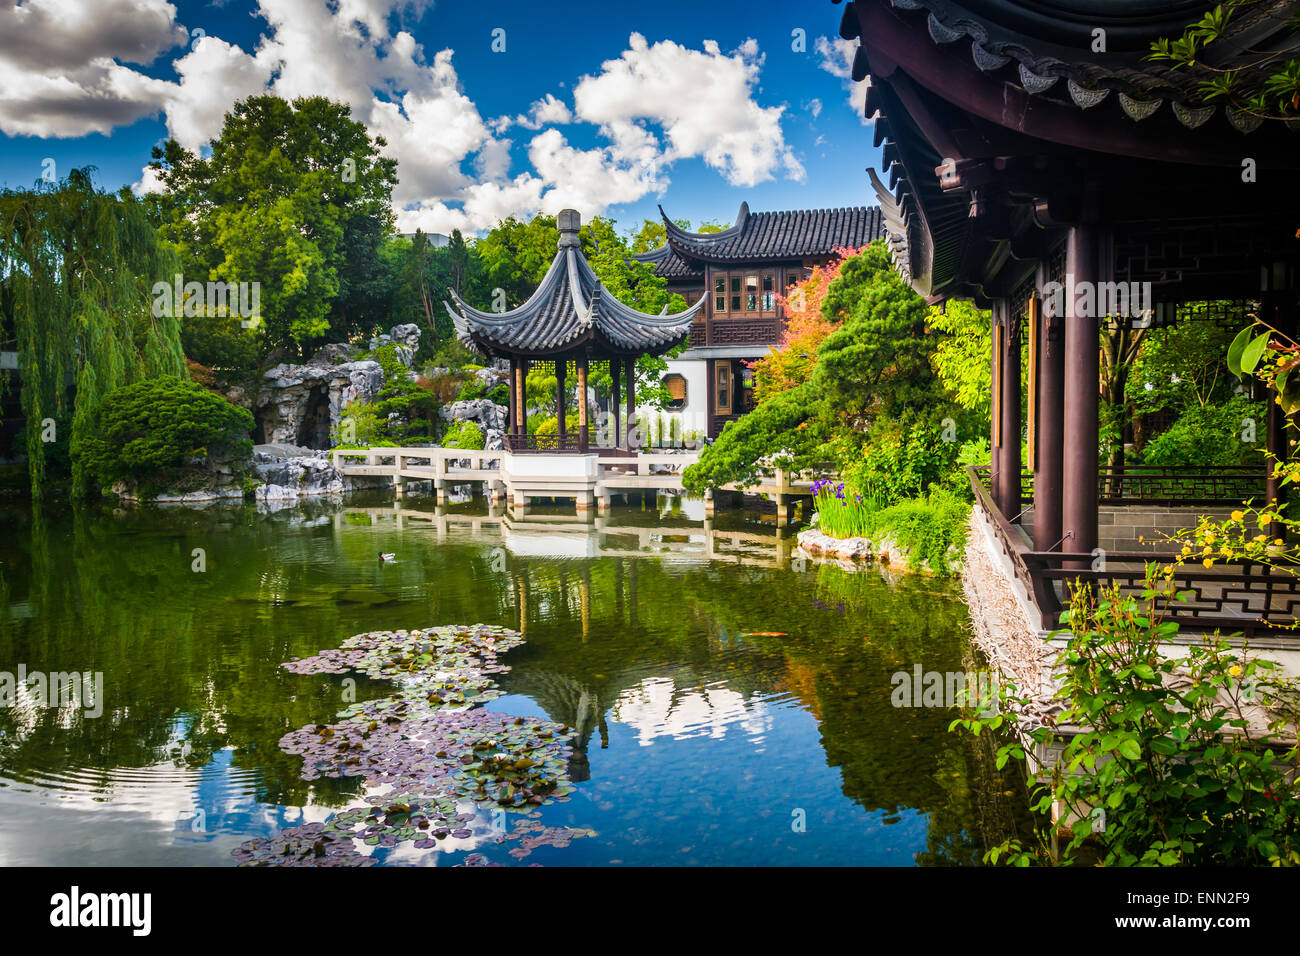 Pagoda and pond at the Lan Su Chinese Garden in Portland, Oregon. Stock Photo